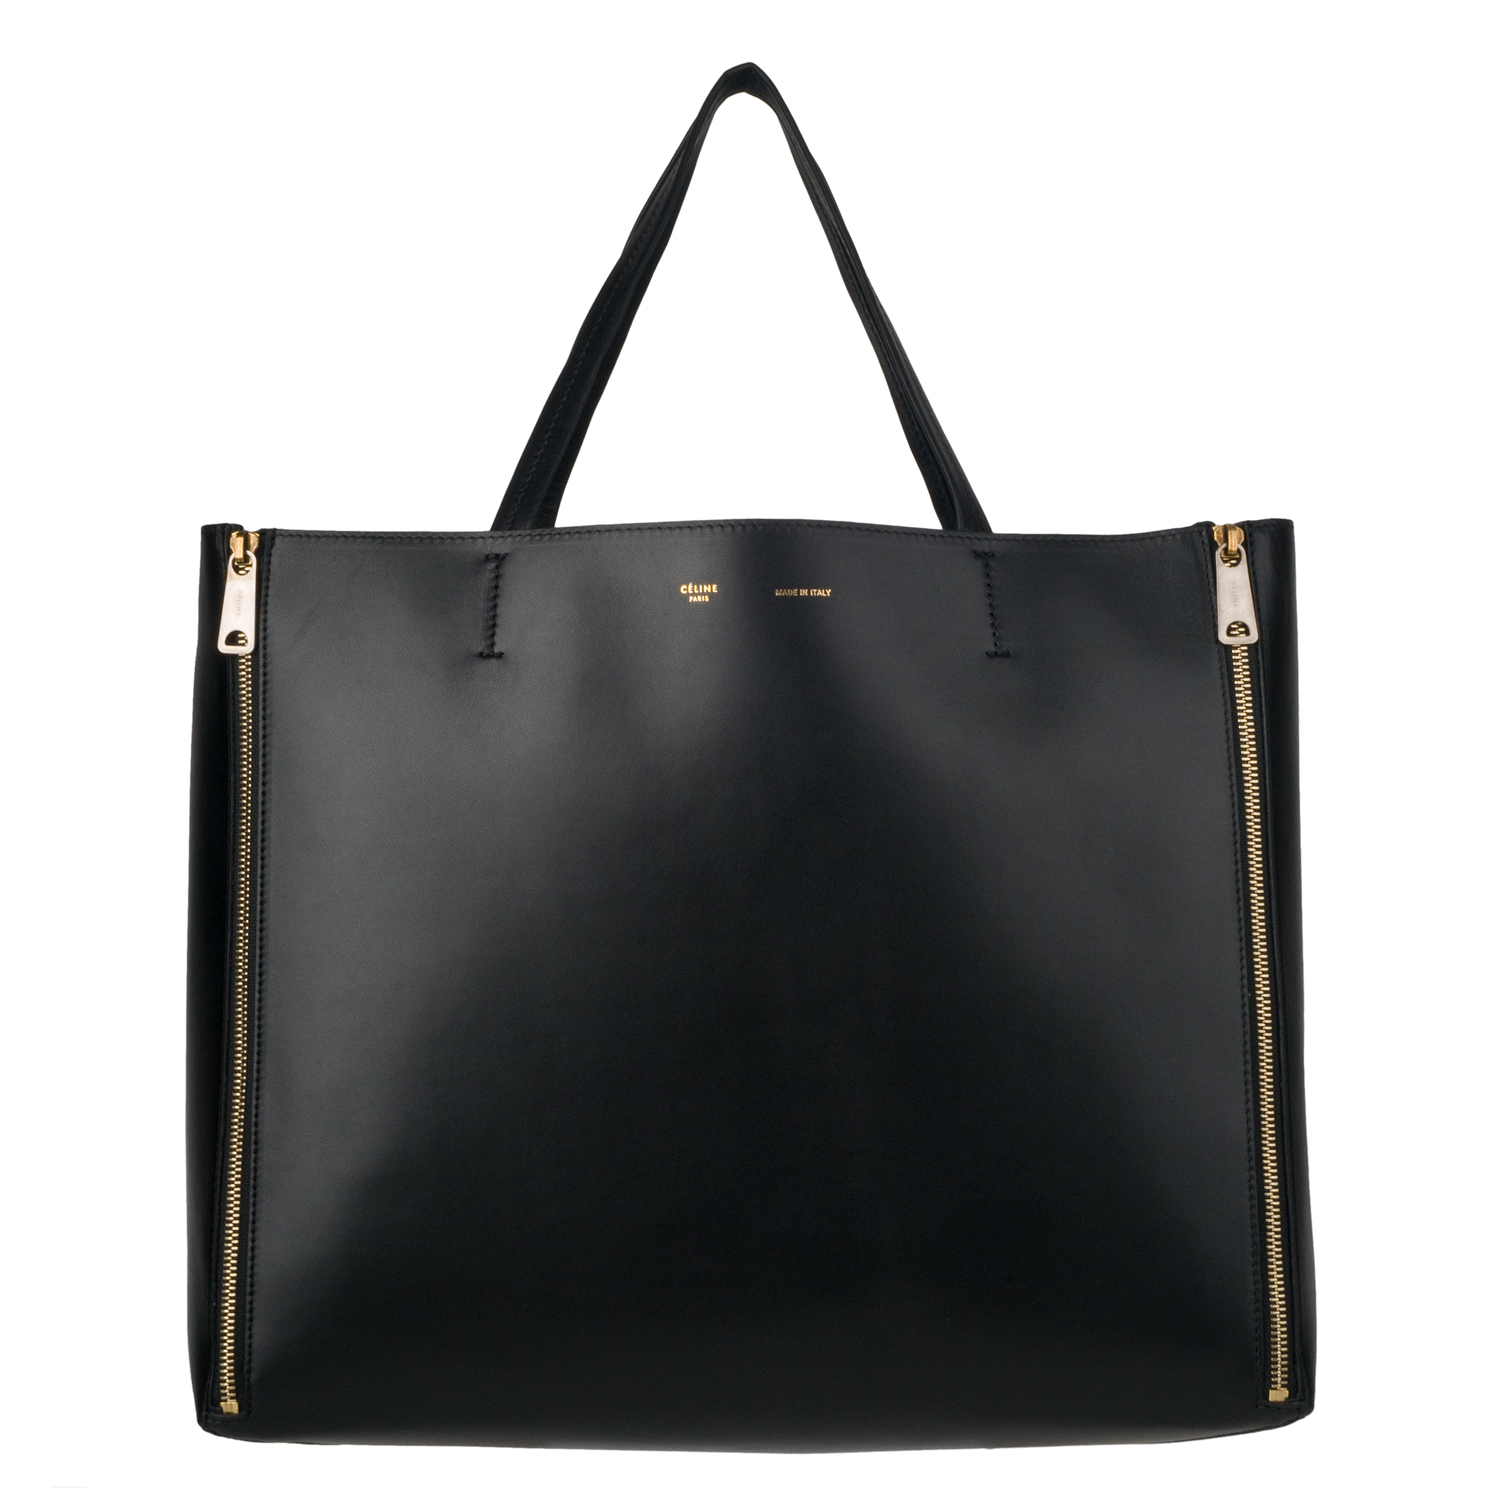 One Day.Some Day: Covet: Celine Cabas Zipper Tote